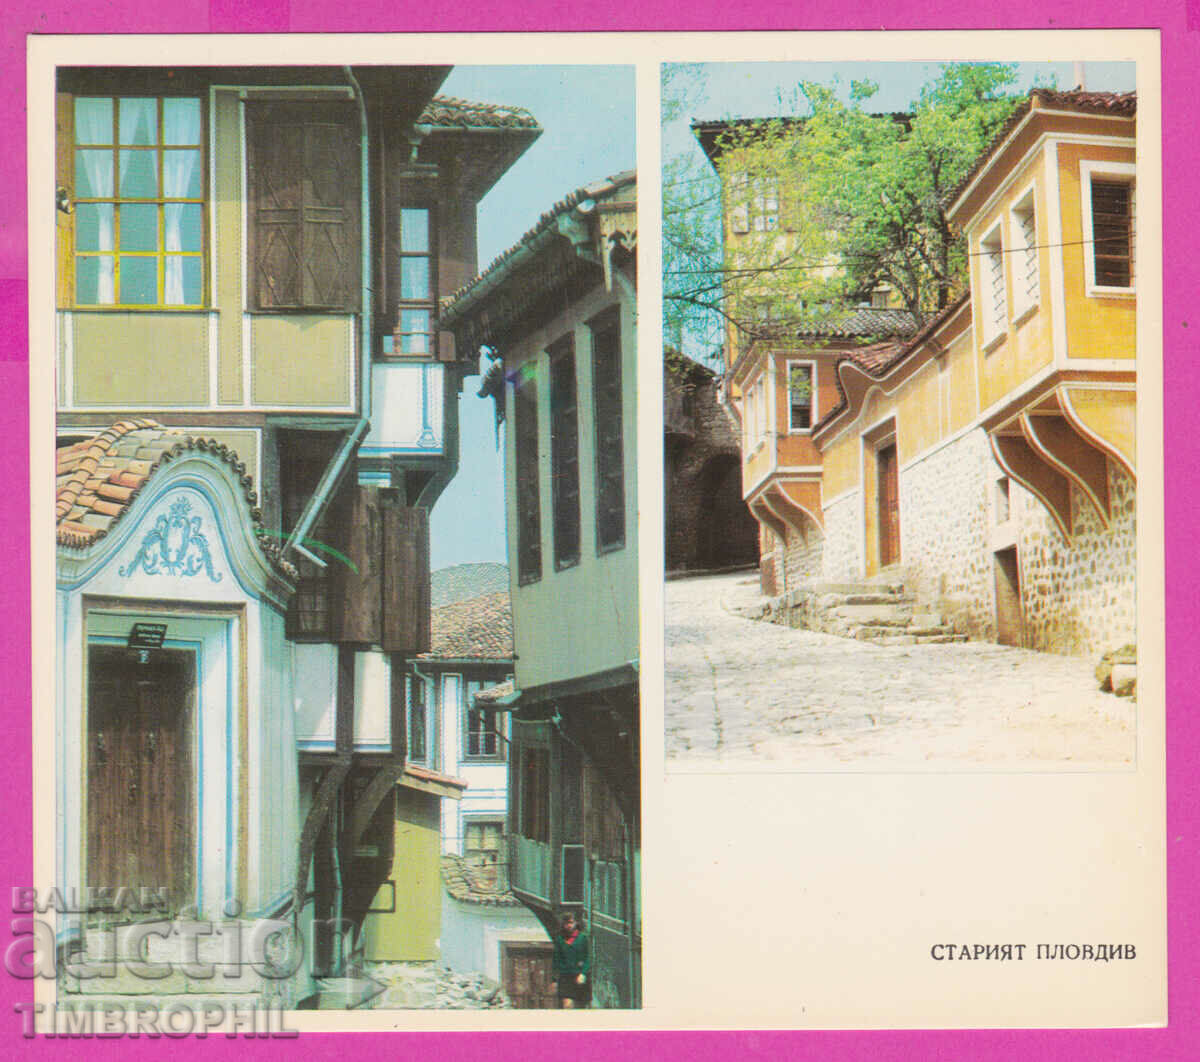 274627 / Plovdiv - the old town - Bulgaria postcard